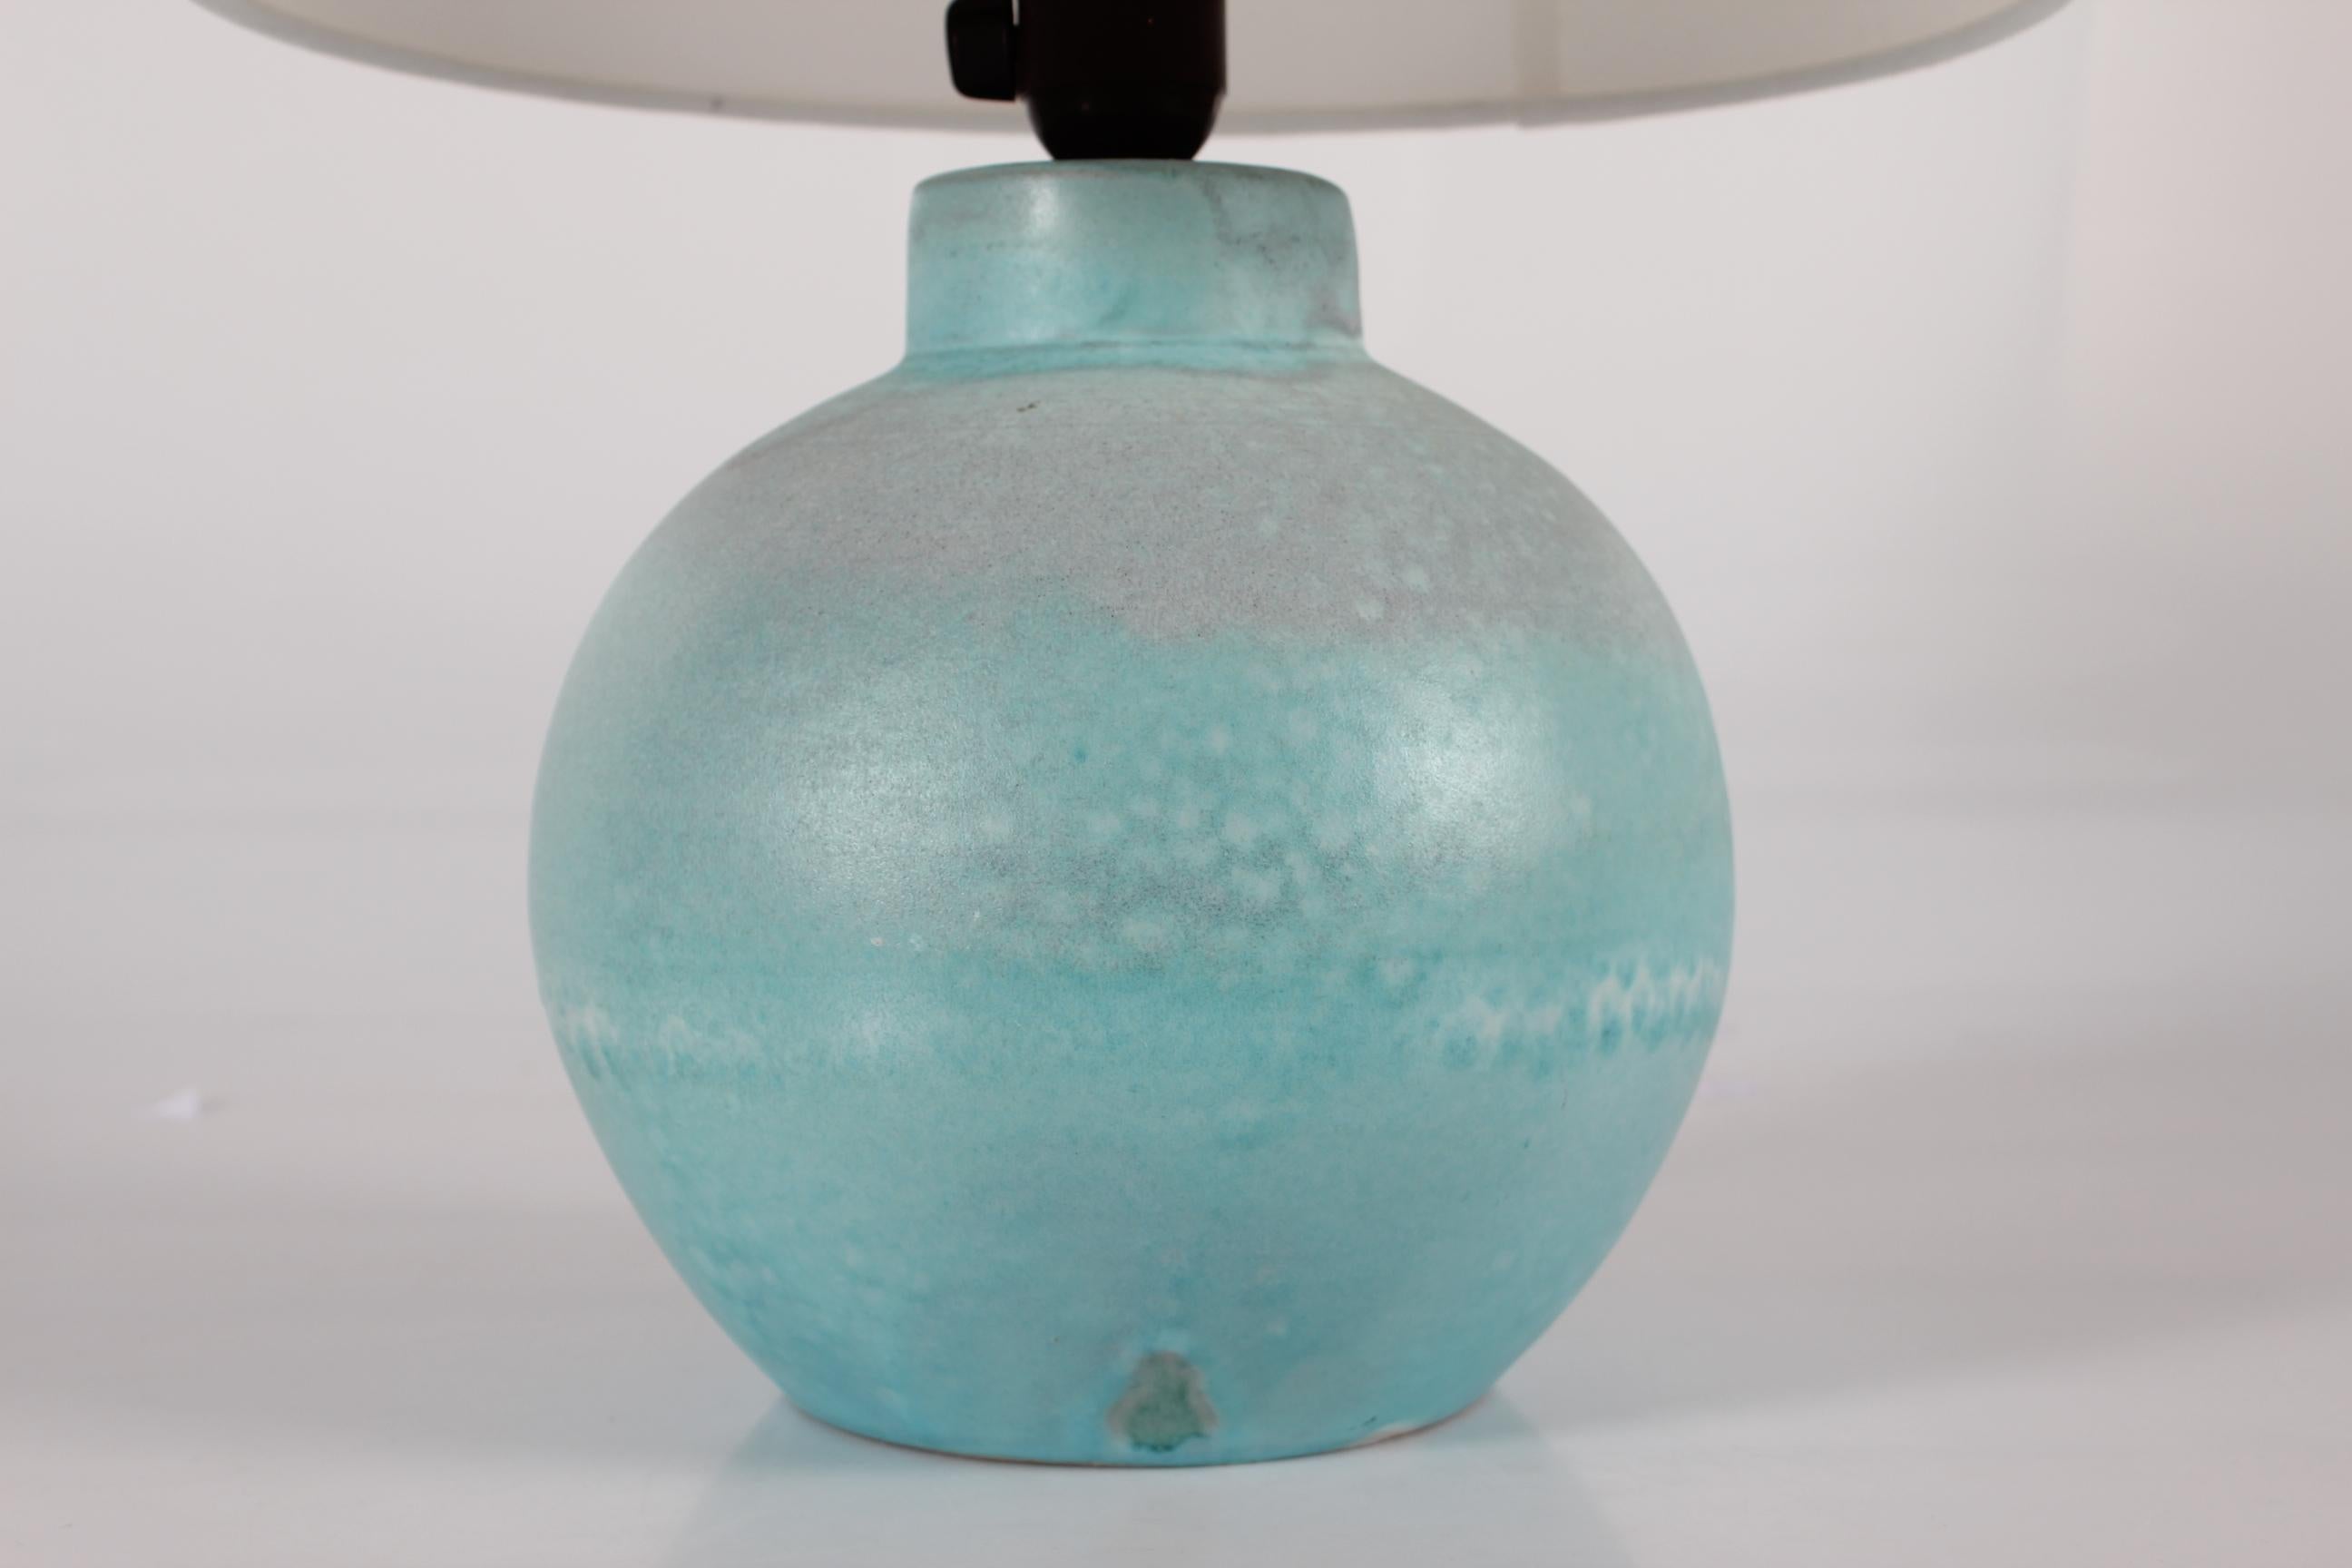 Danish Art Deco ball shaped ceramic table lamp with matte glaze in light turquoise colors.
Designed and made in the 1940s.

If you wish a lamp shade as shown in the pictures can be purchased.

Measurements 
Height ceramic part only 21